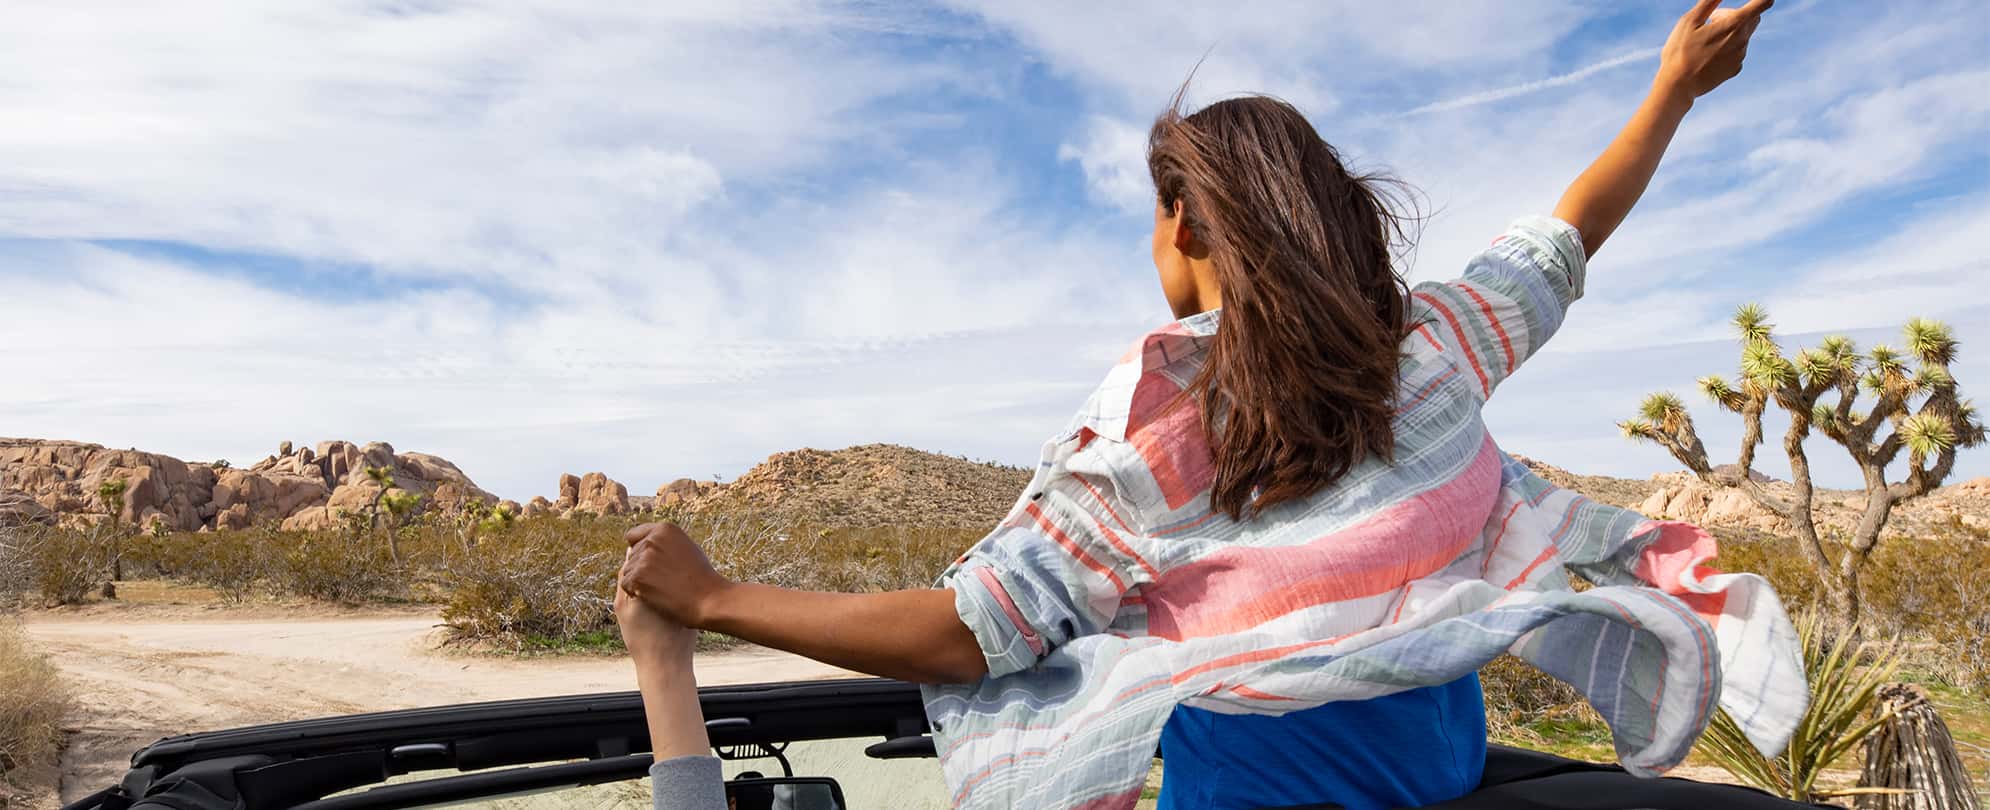 A woman raises her hands out of the top of a open-top convertible while on a road trip through the desert